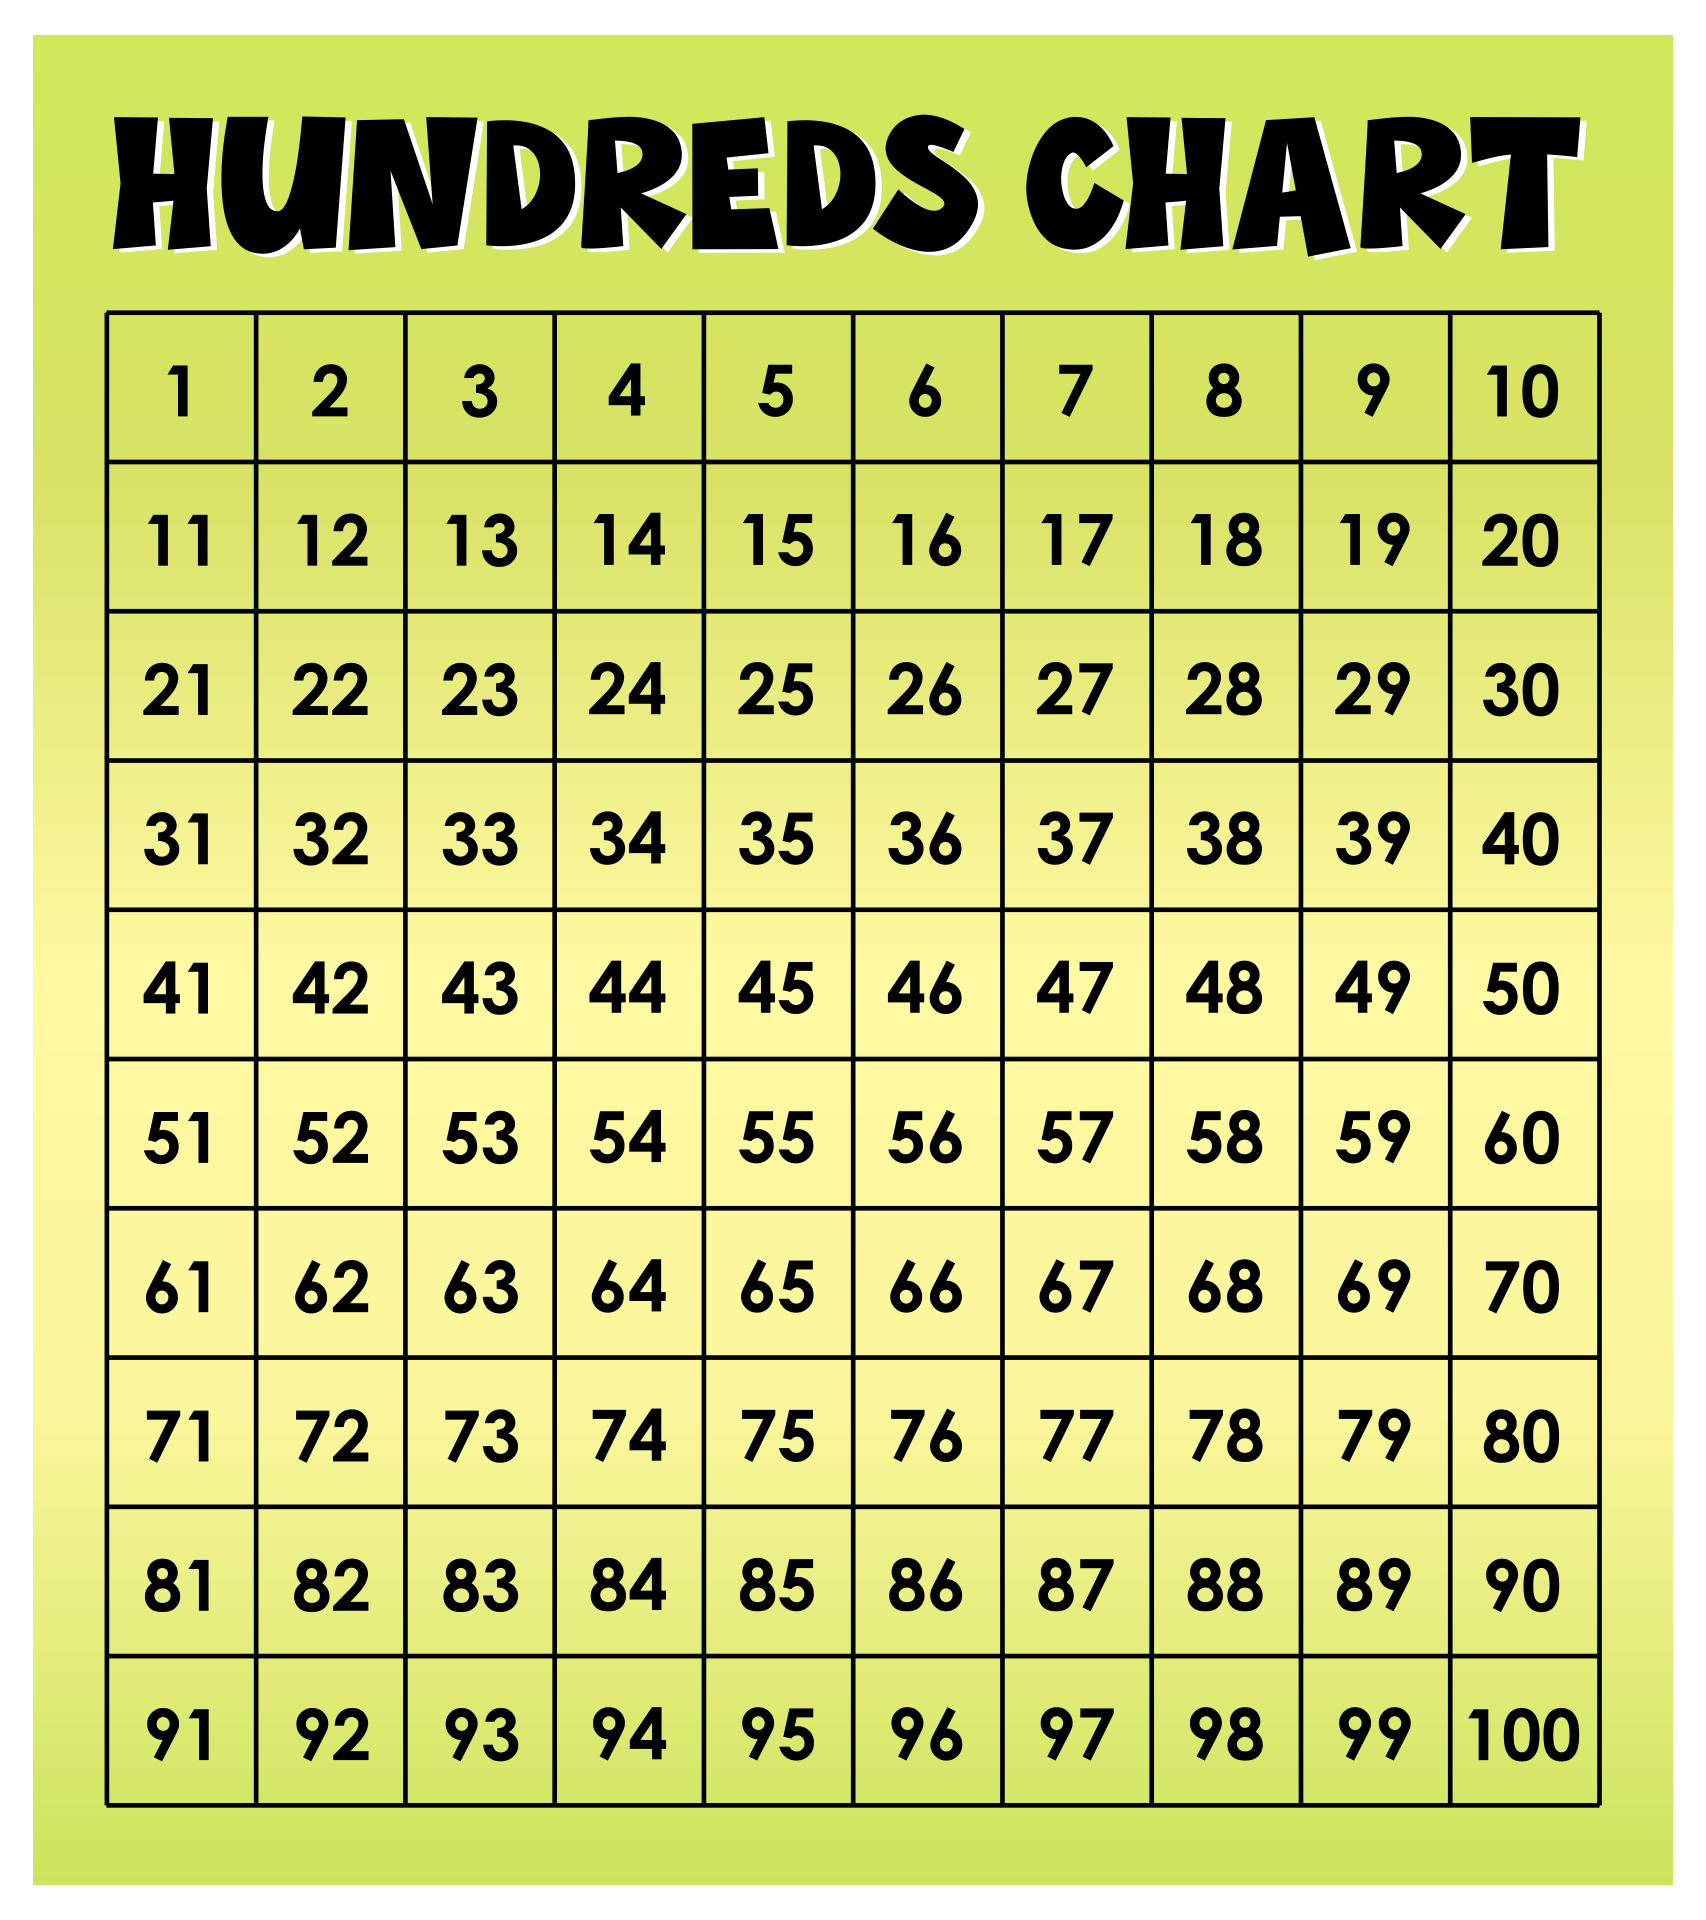 number-printable-images-gallery-category-page-9-printablee